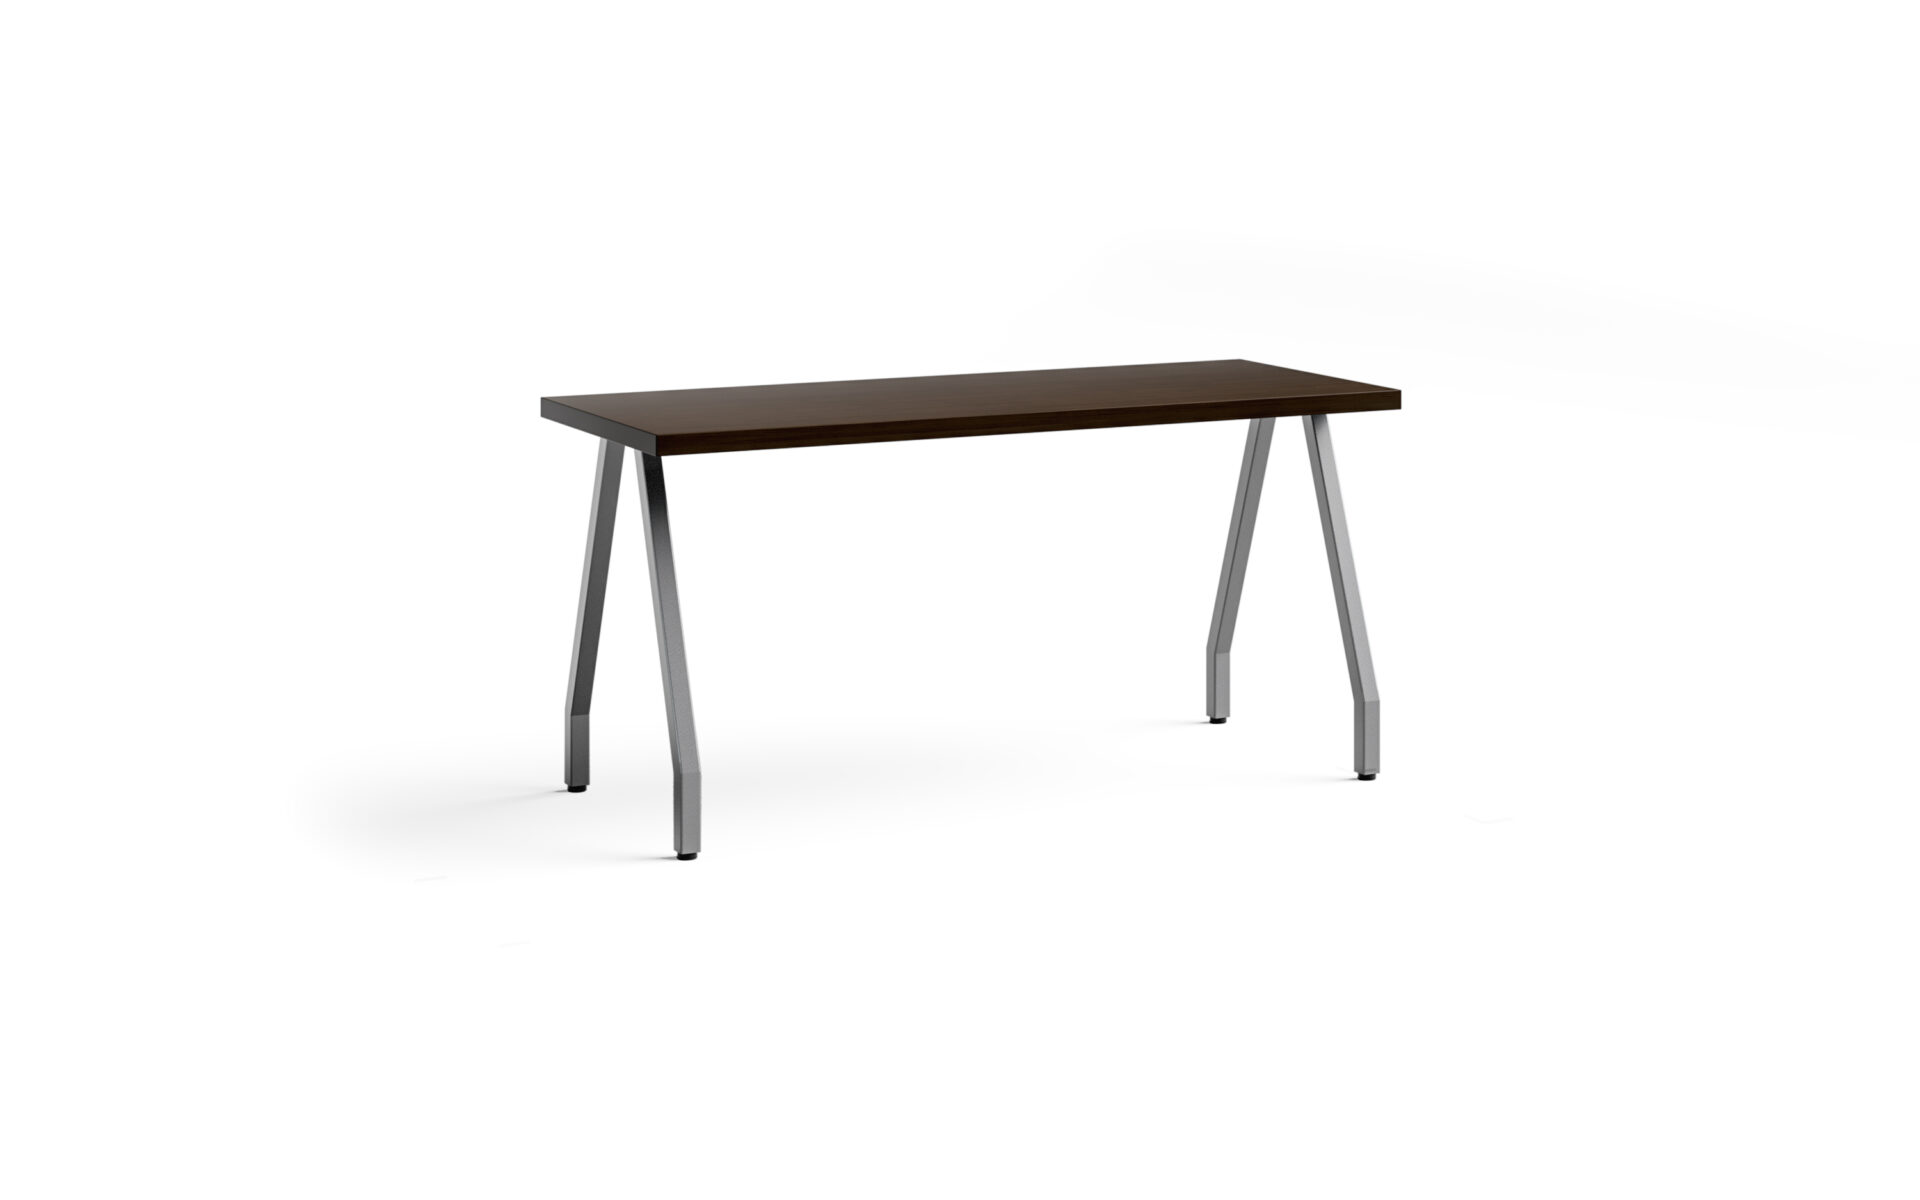 Tall angled legs support a large rectangular table.